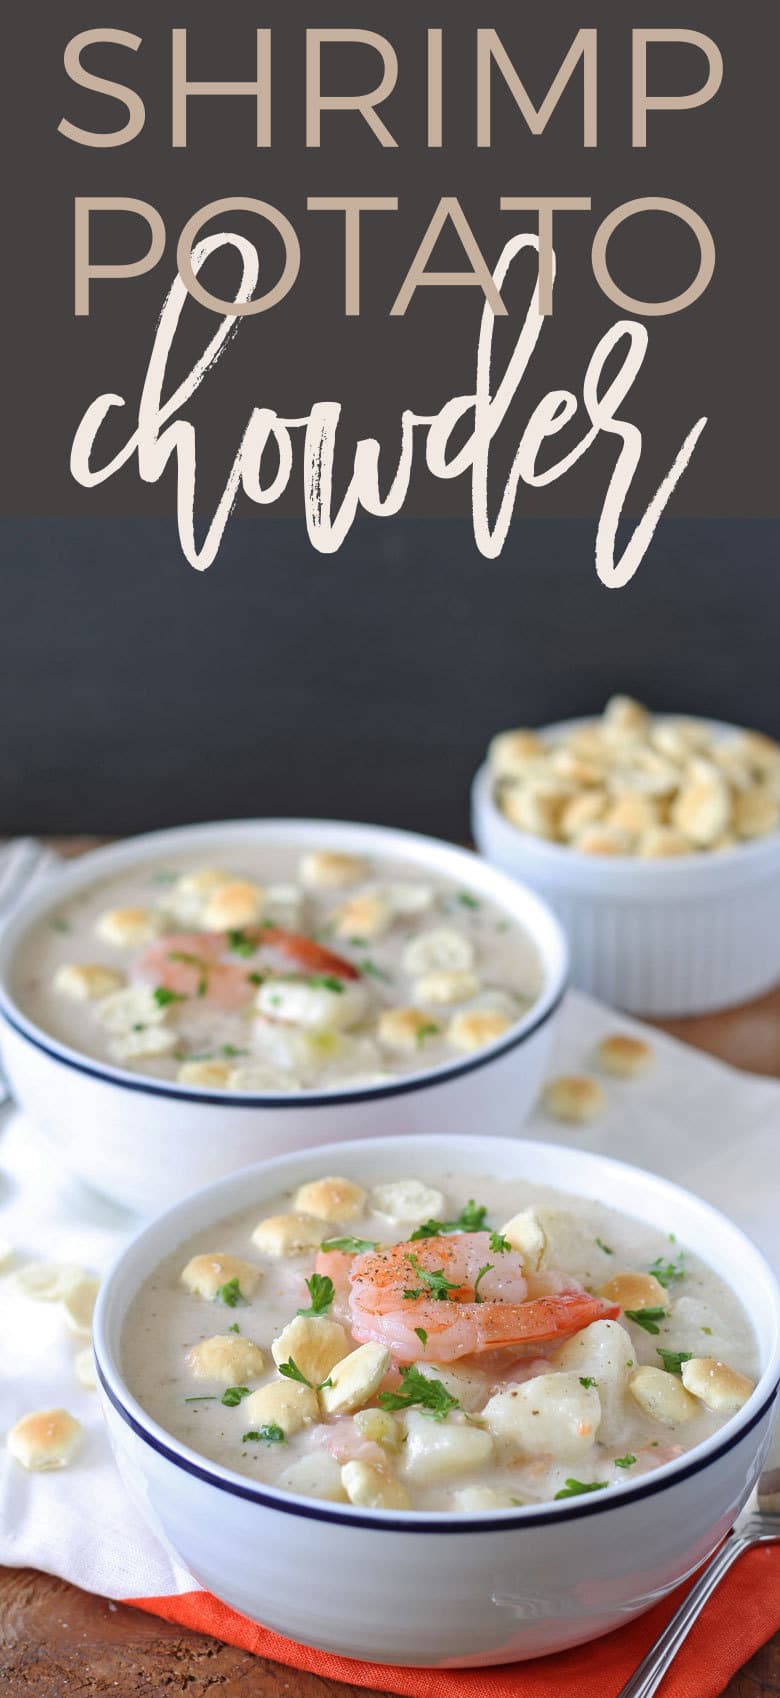 If you're looking for a new winter soup, try this shrimp potato chowder recipe! It's easy to make and delicious - serve it in a bread bowl! | honeyandbirch.com